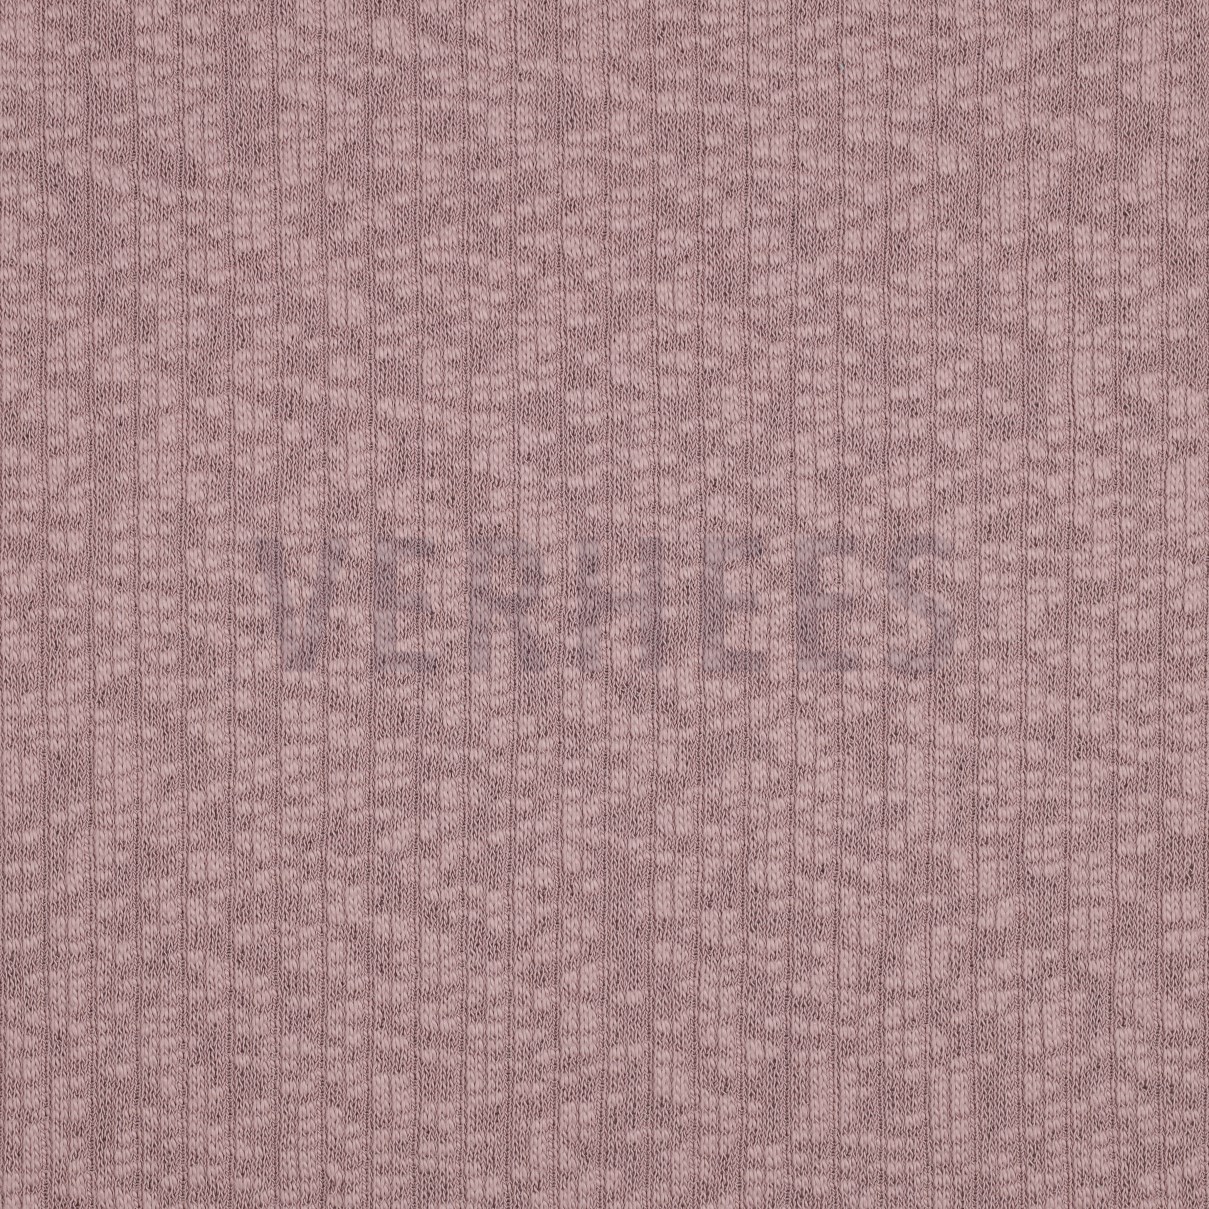 COTTON KNITTED CABLE BLUSH (high resolution)